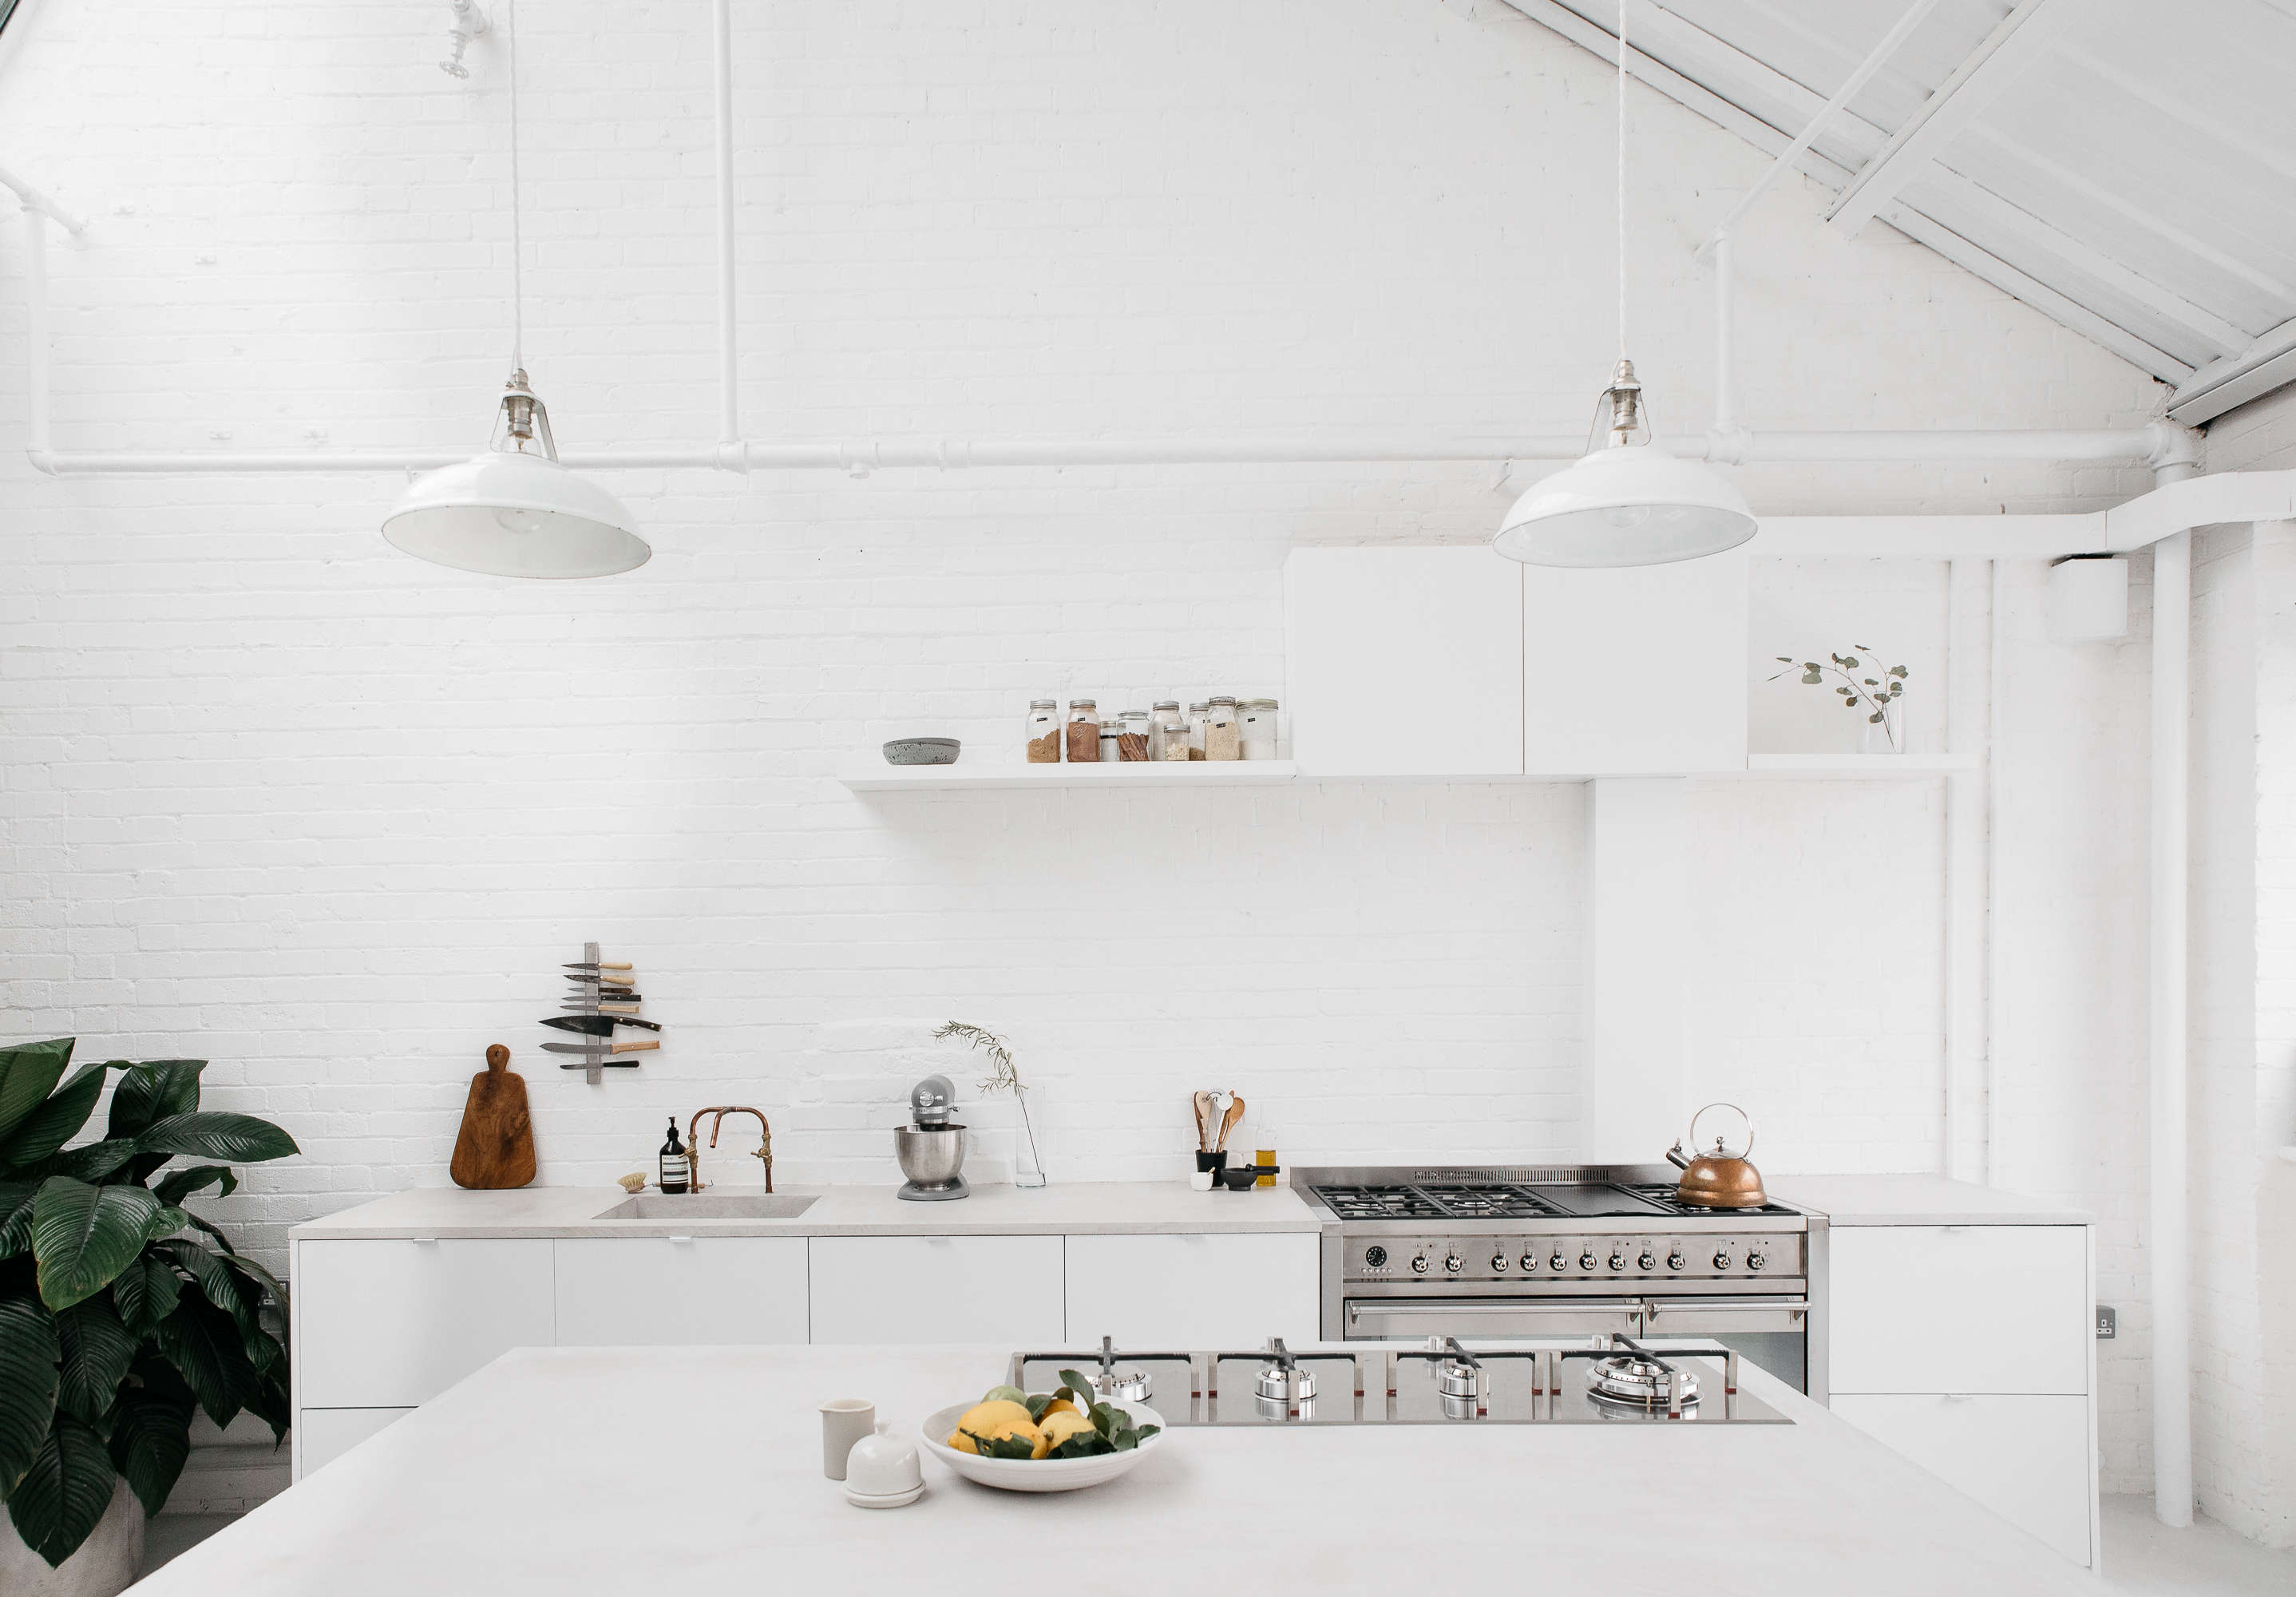 Steal This Look: All-White Industrial Kitchen in London, Ikea Hacks